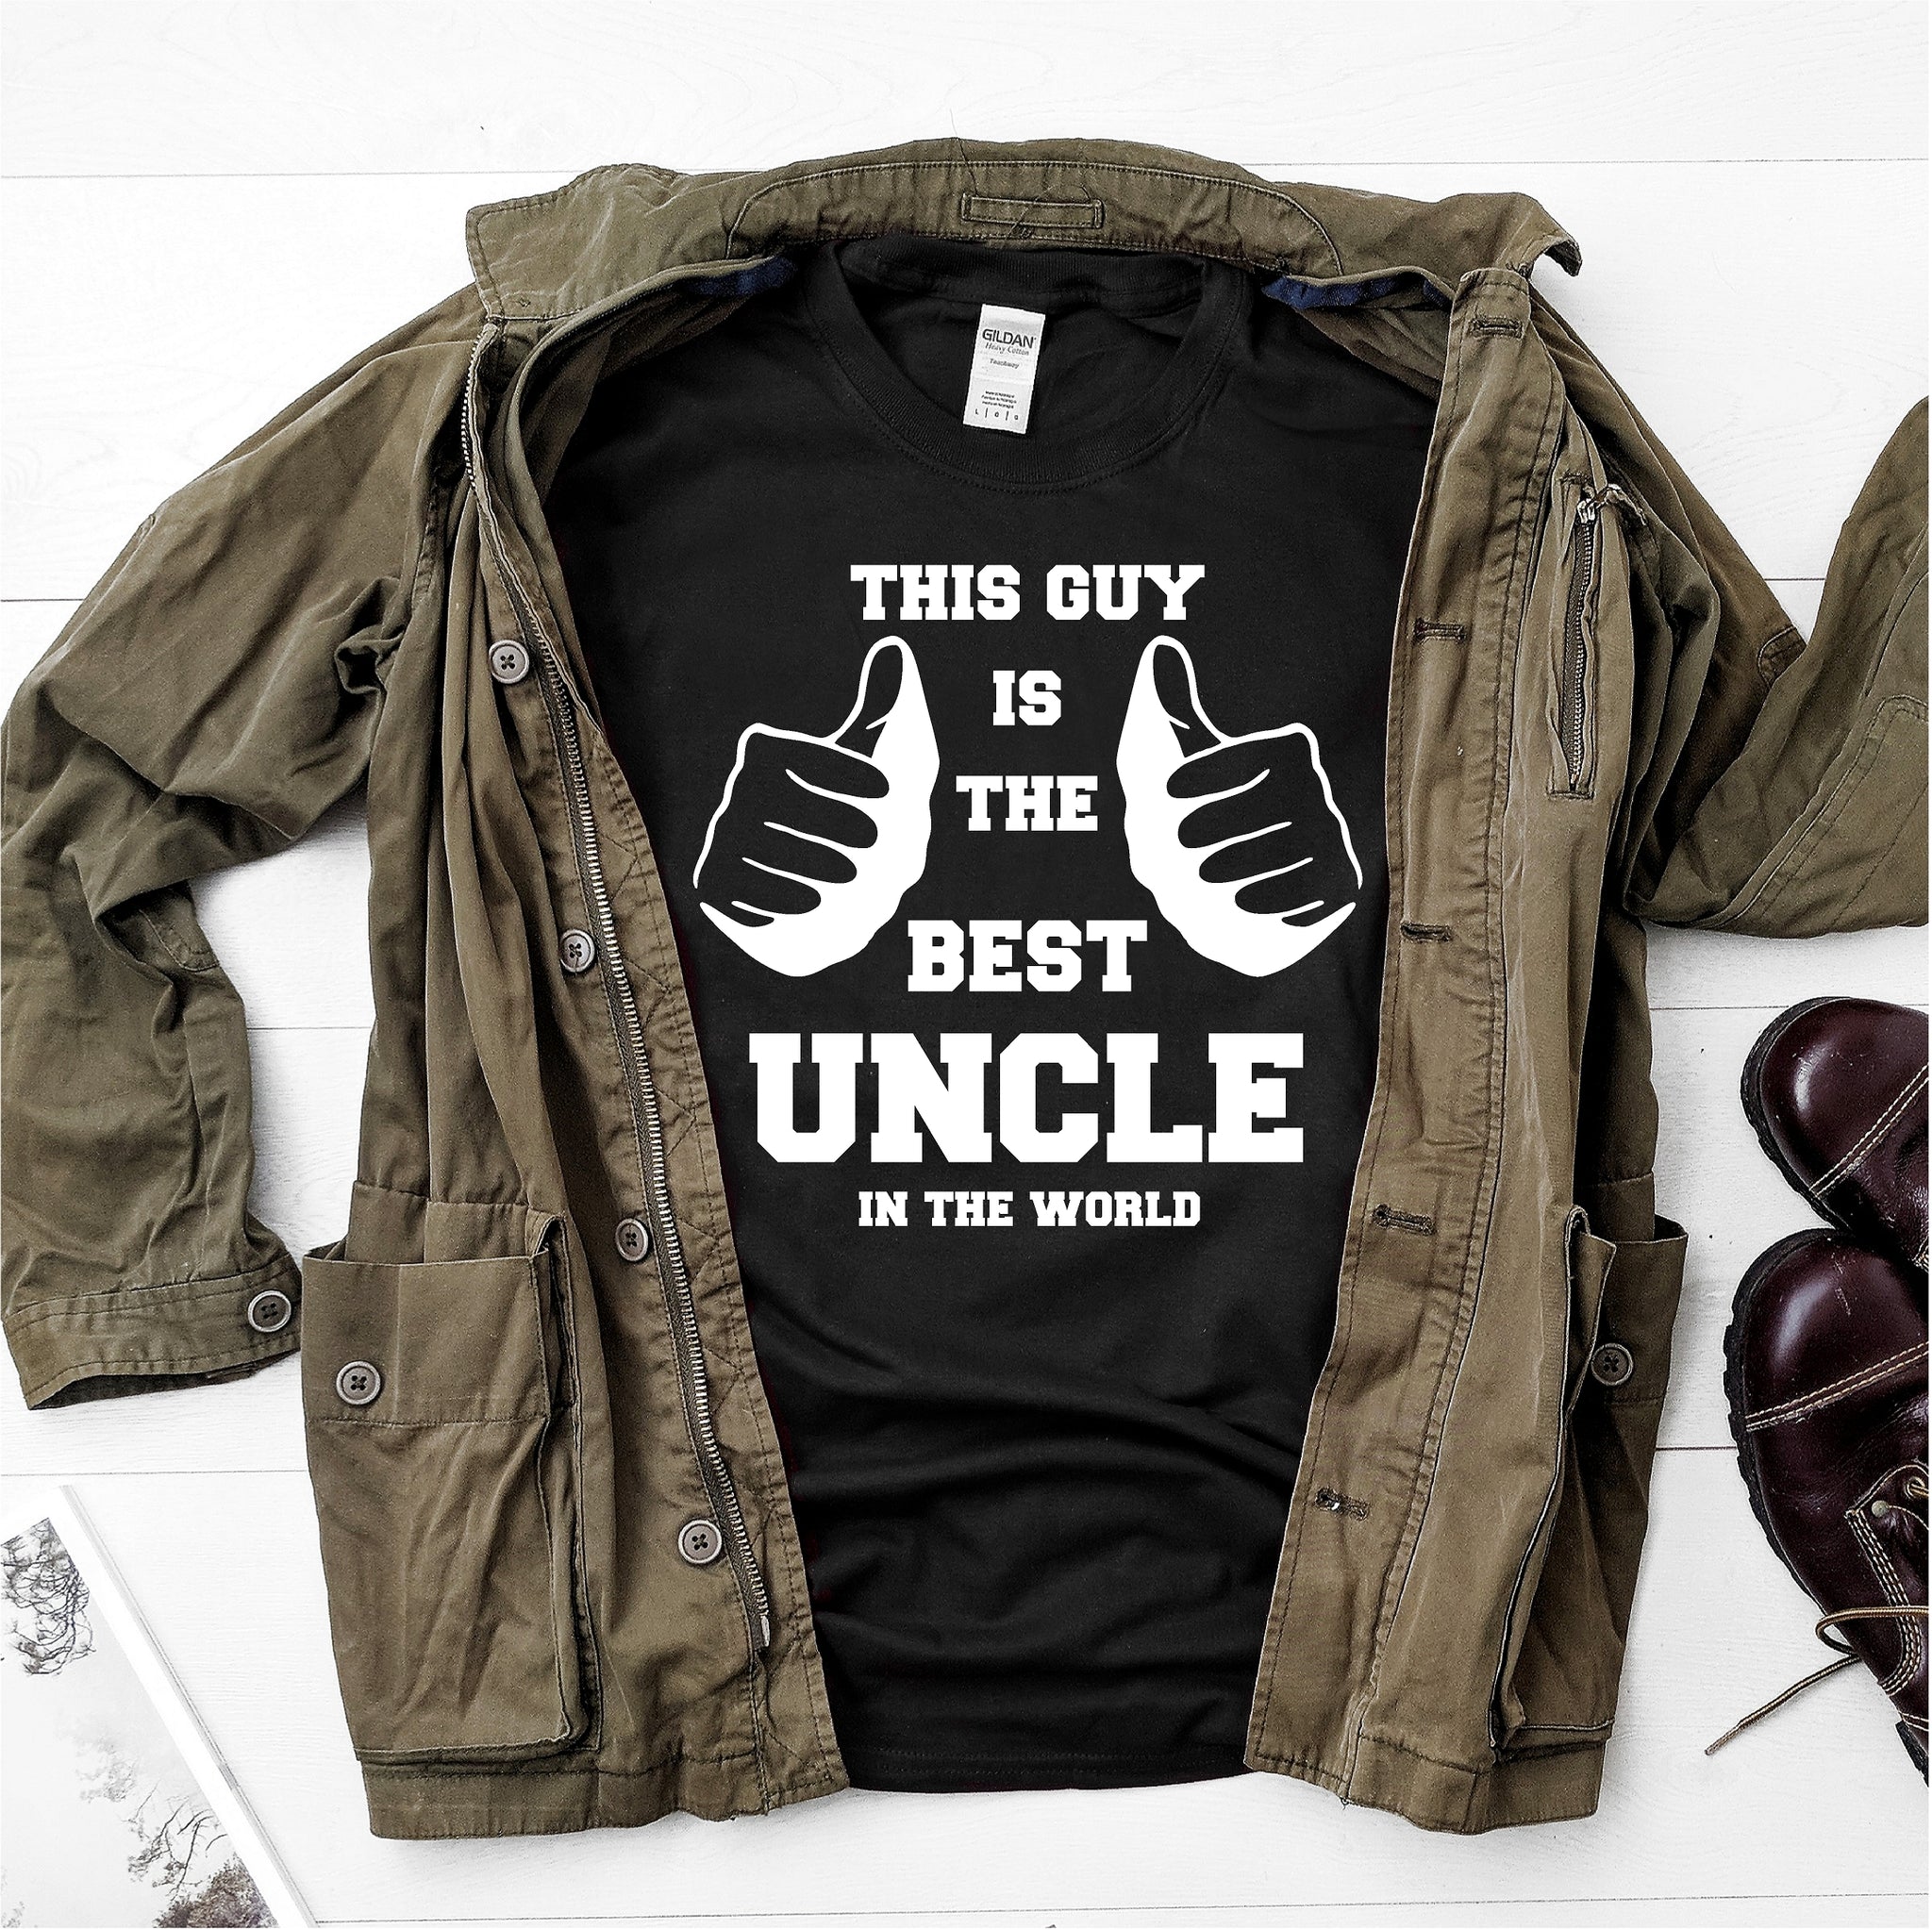 This guy is the best uncle in the world- Ultra Cotton Short Sleeve T-Shirt - DFHM54